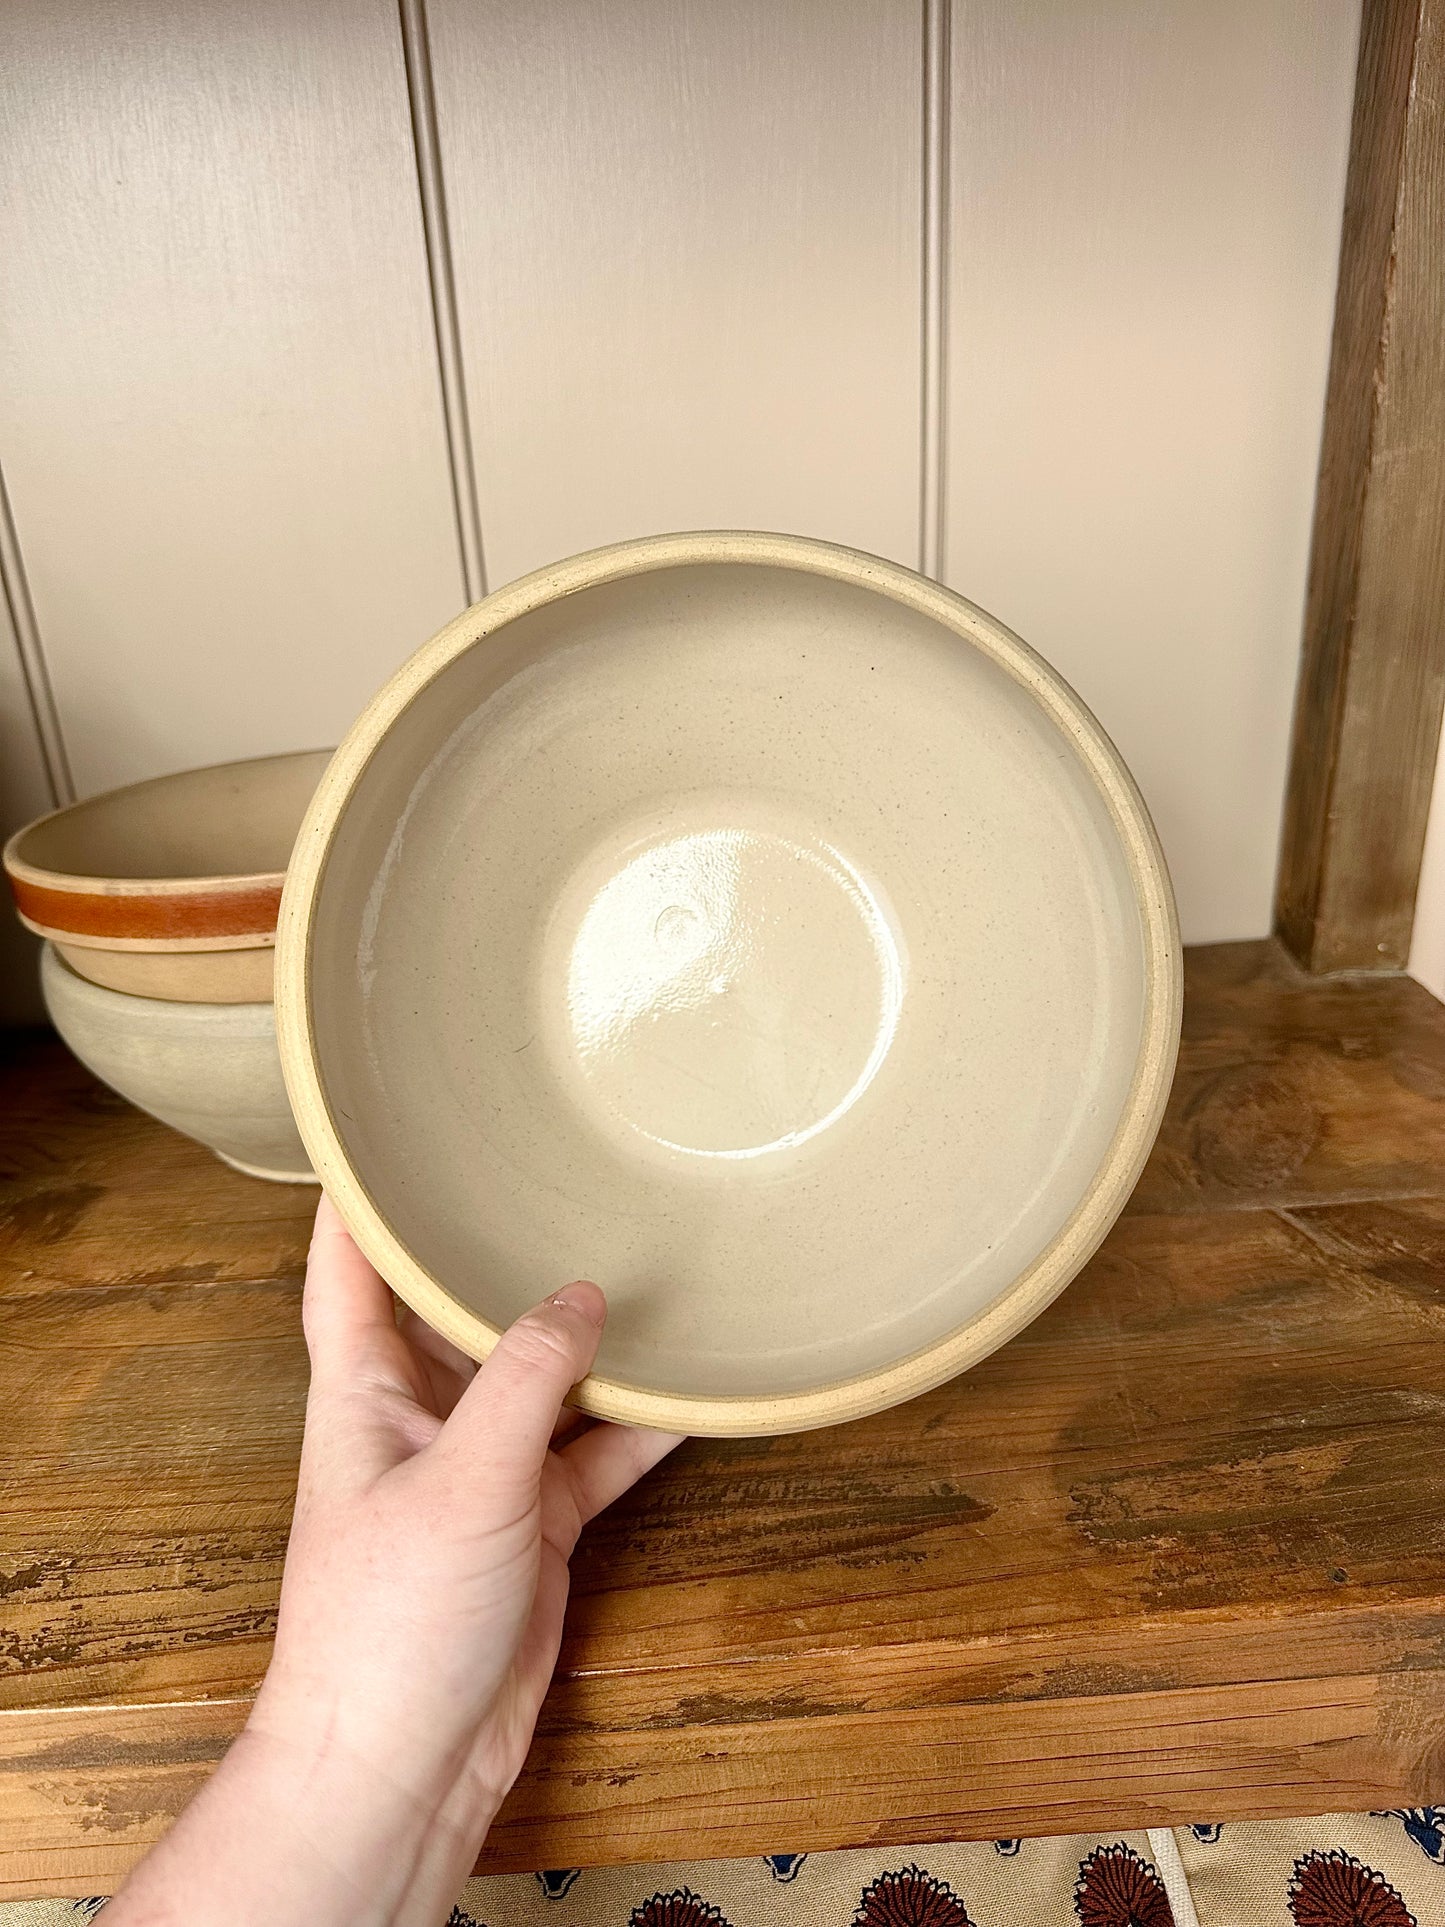 Large Vintage French Dairy Bowl